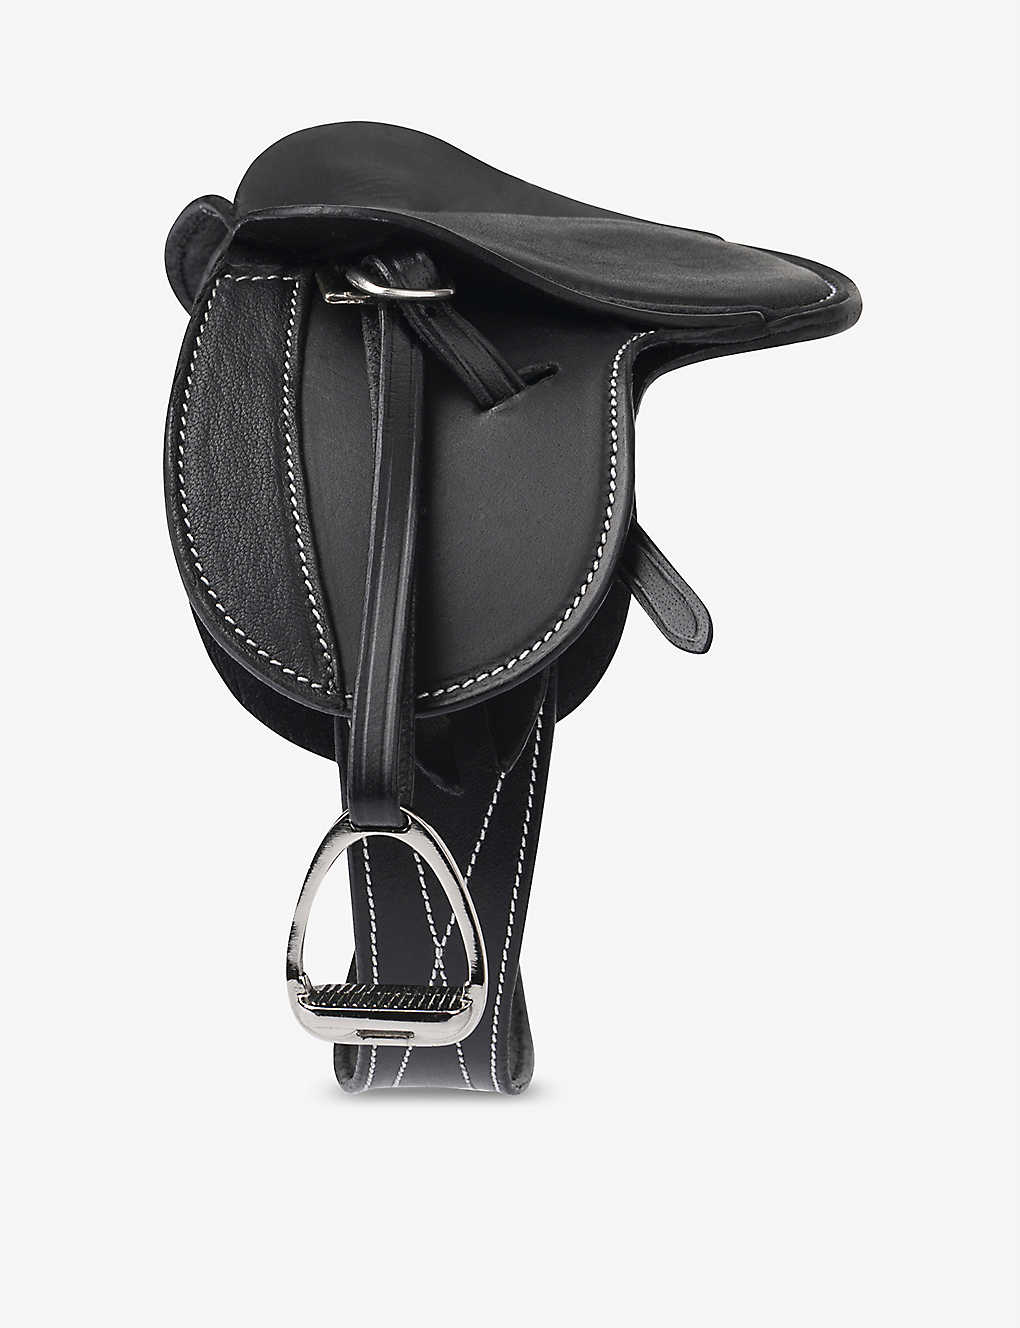 6 X HERITAGE 100% ENGLISH MADE BLACK LEATHER GIRTH STRAPS for ANY MAKE OF SADDLE 